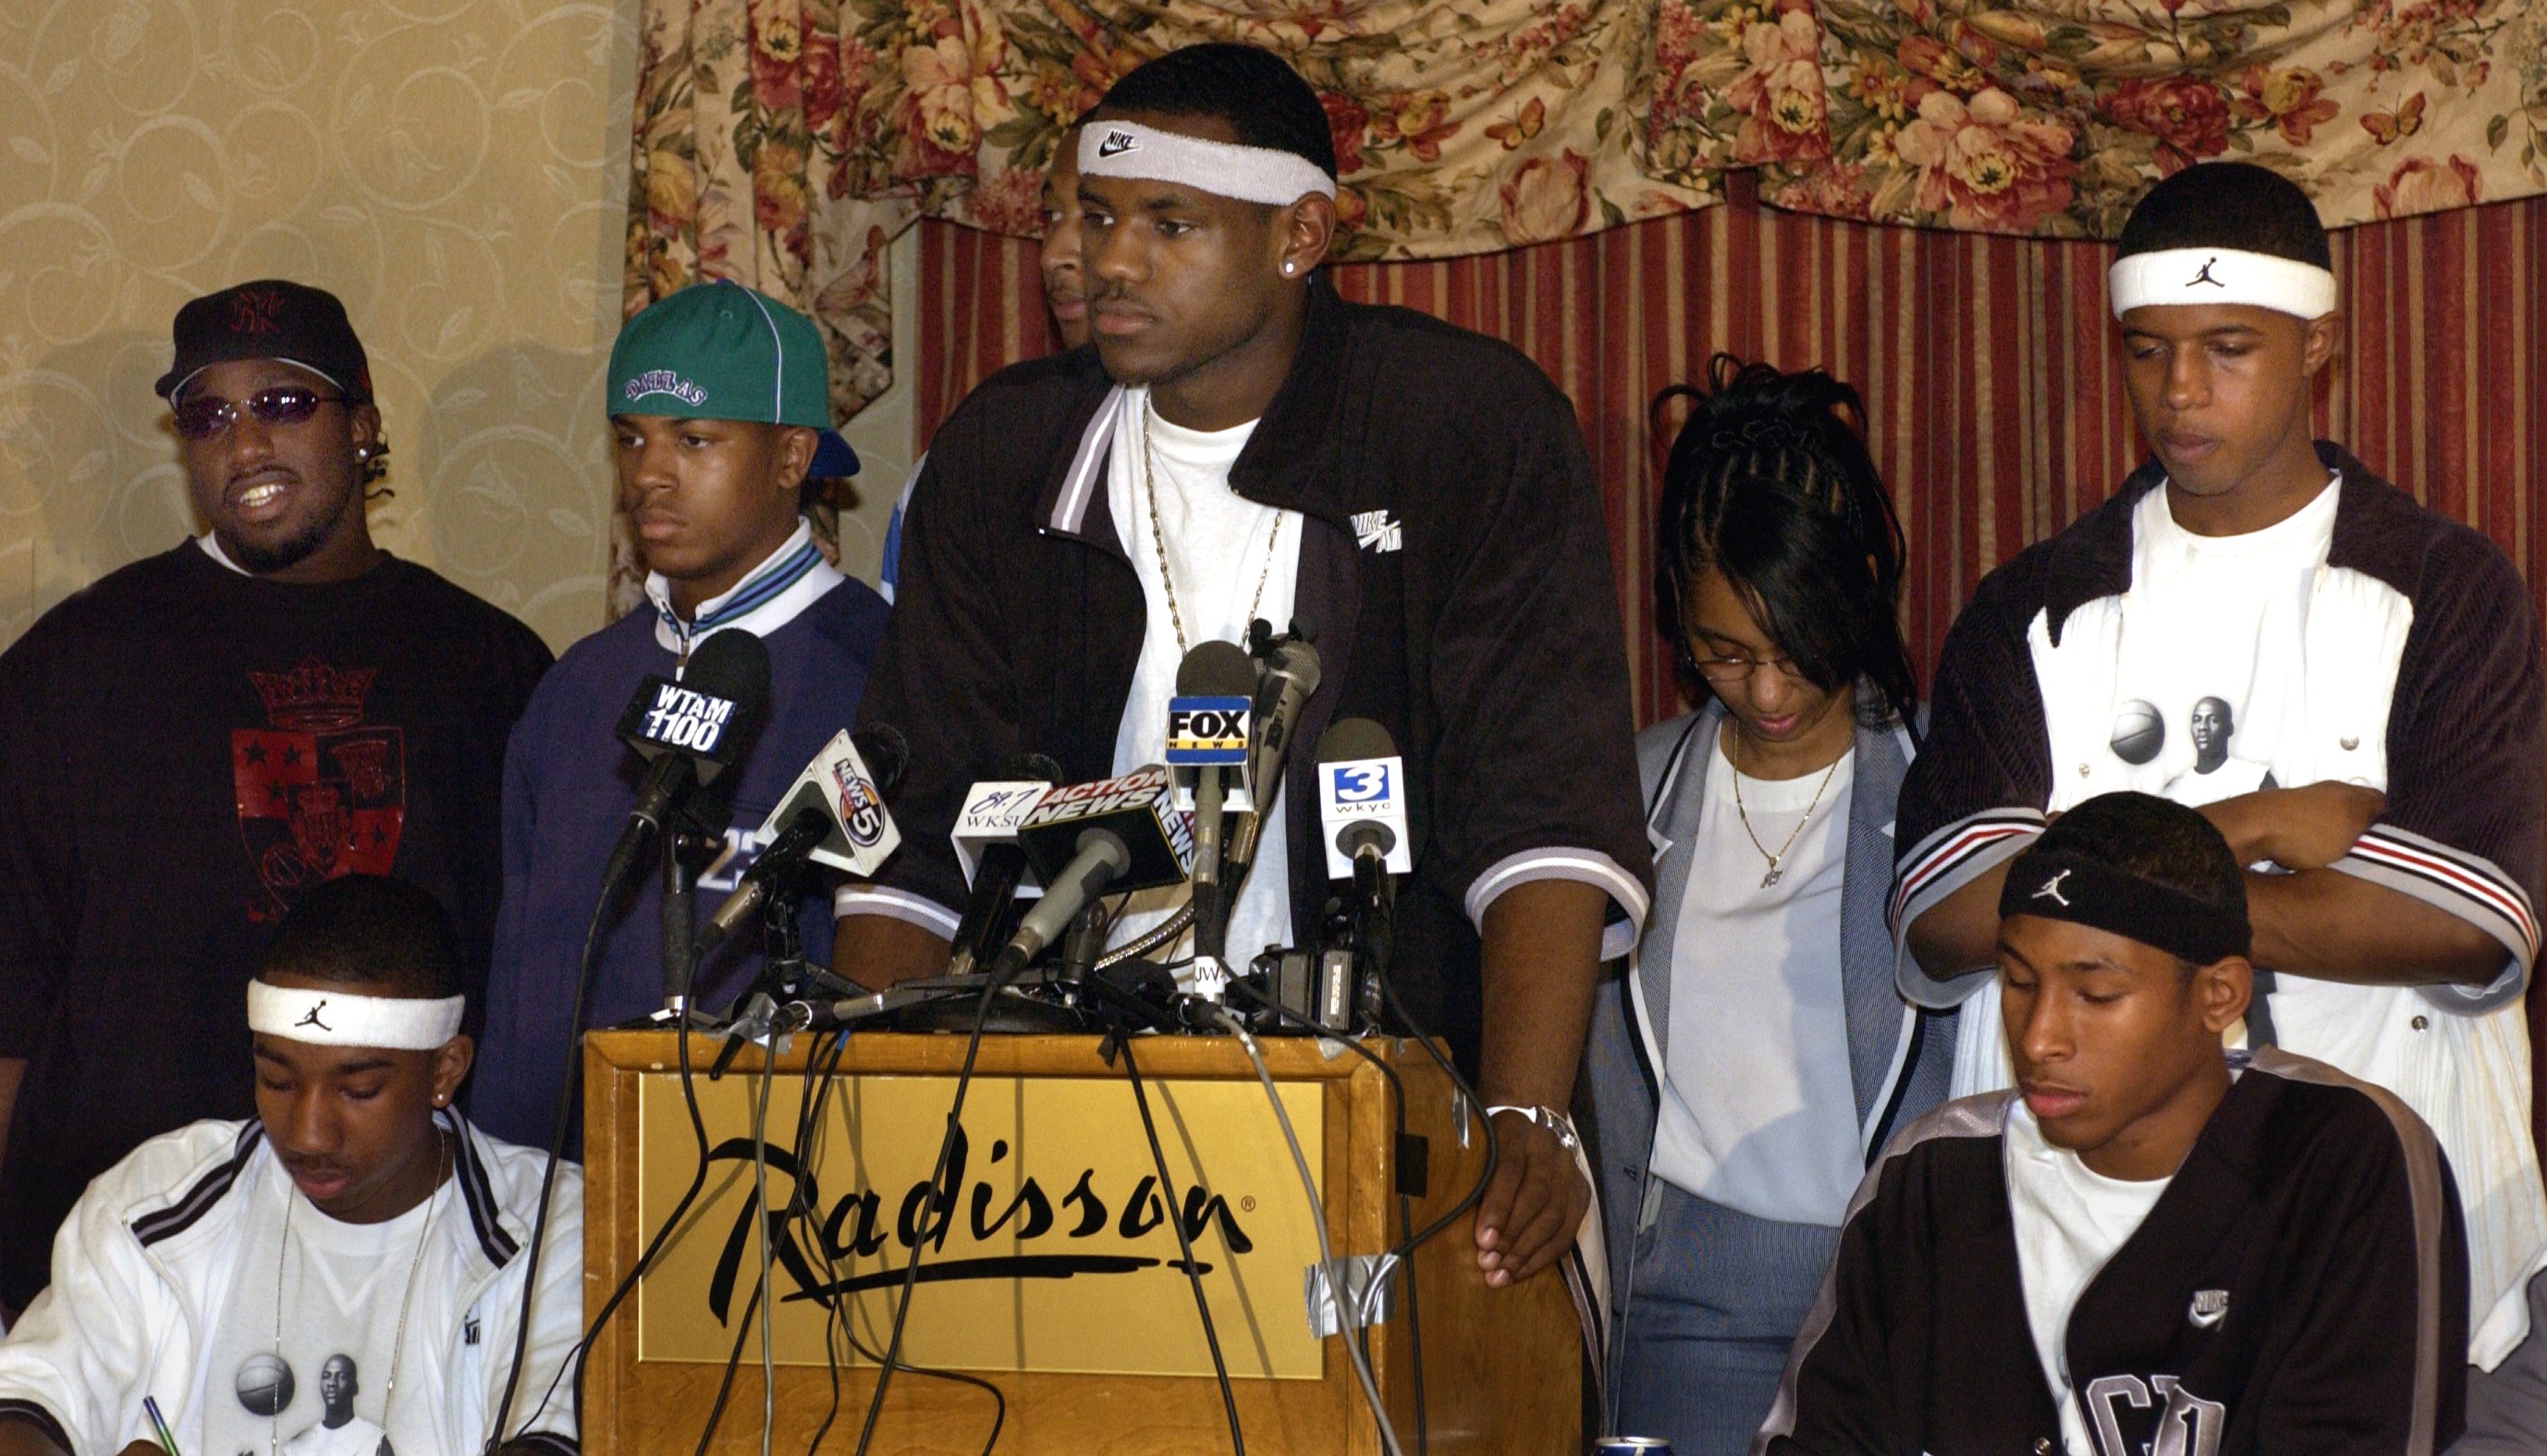 LeBron James, during press conference at the Radisson Hotel, in Akron, Ohio, with his friends and family.  Shot on May 22, 2003.  (Chuck Crow/The Plain Dealer) 